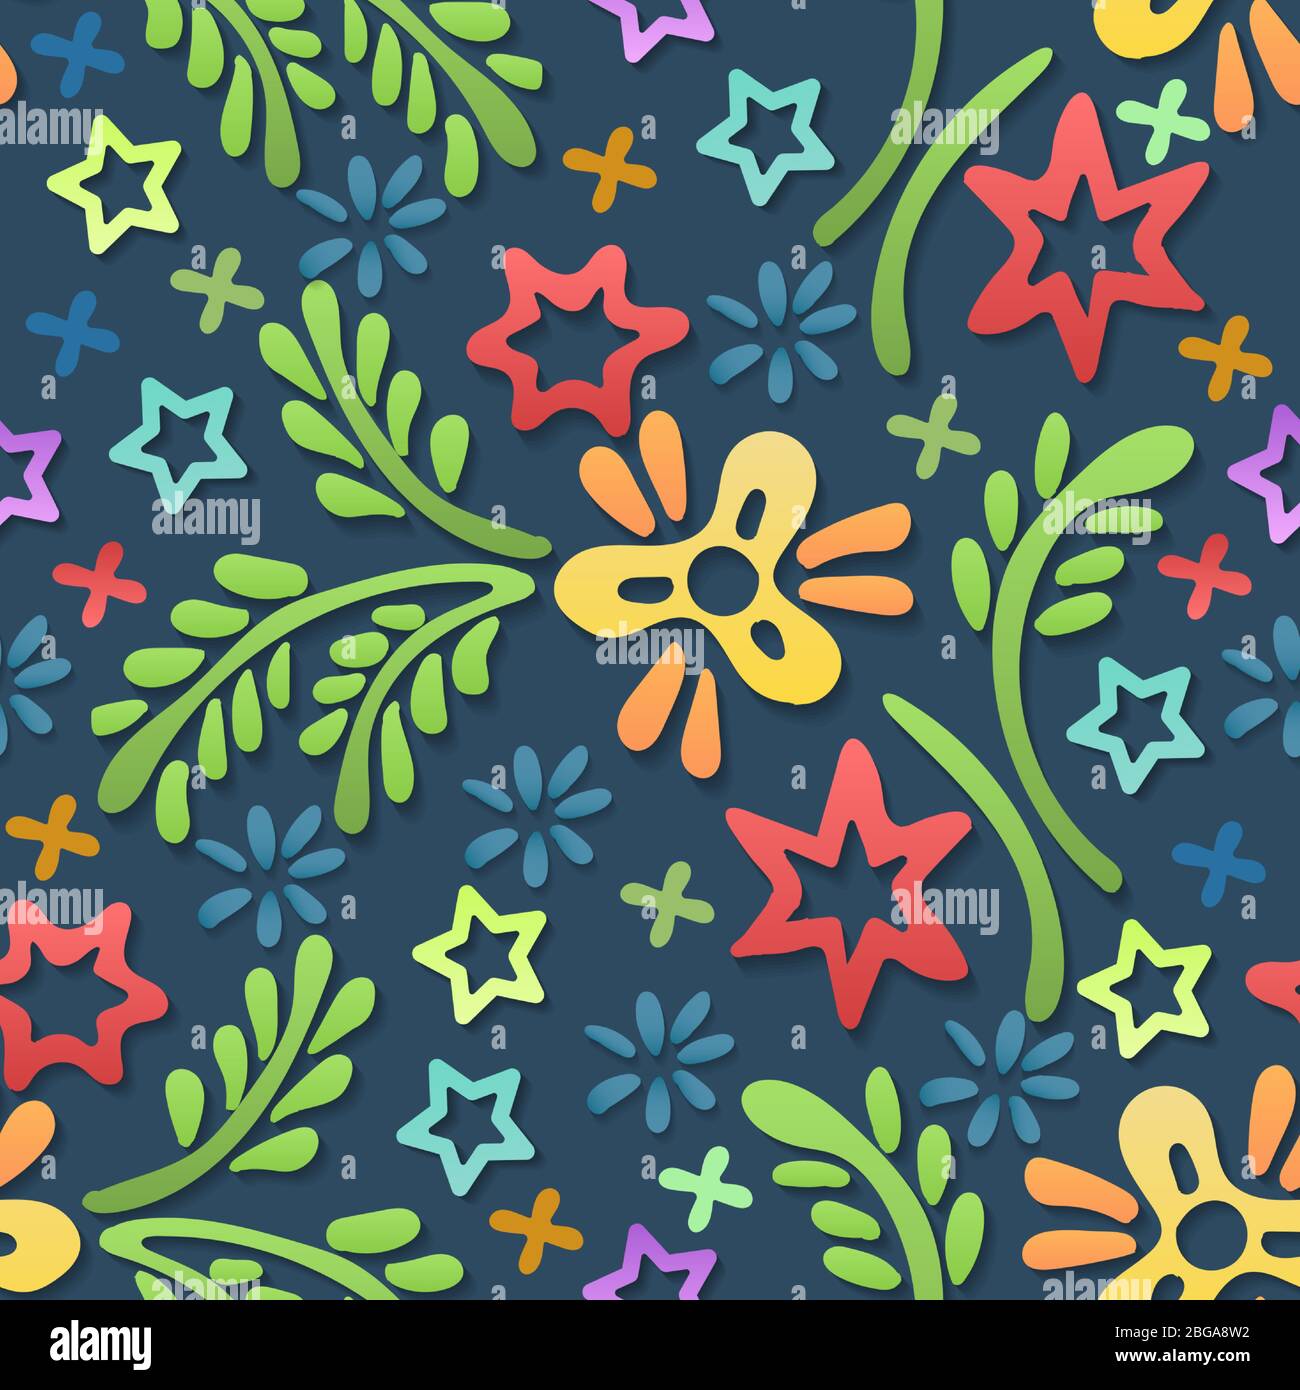 Colorful Doodle Floral Seamless pattern. Vector illustration. Stock Vector